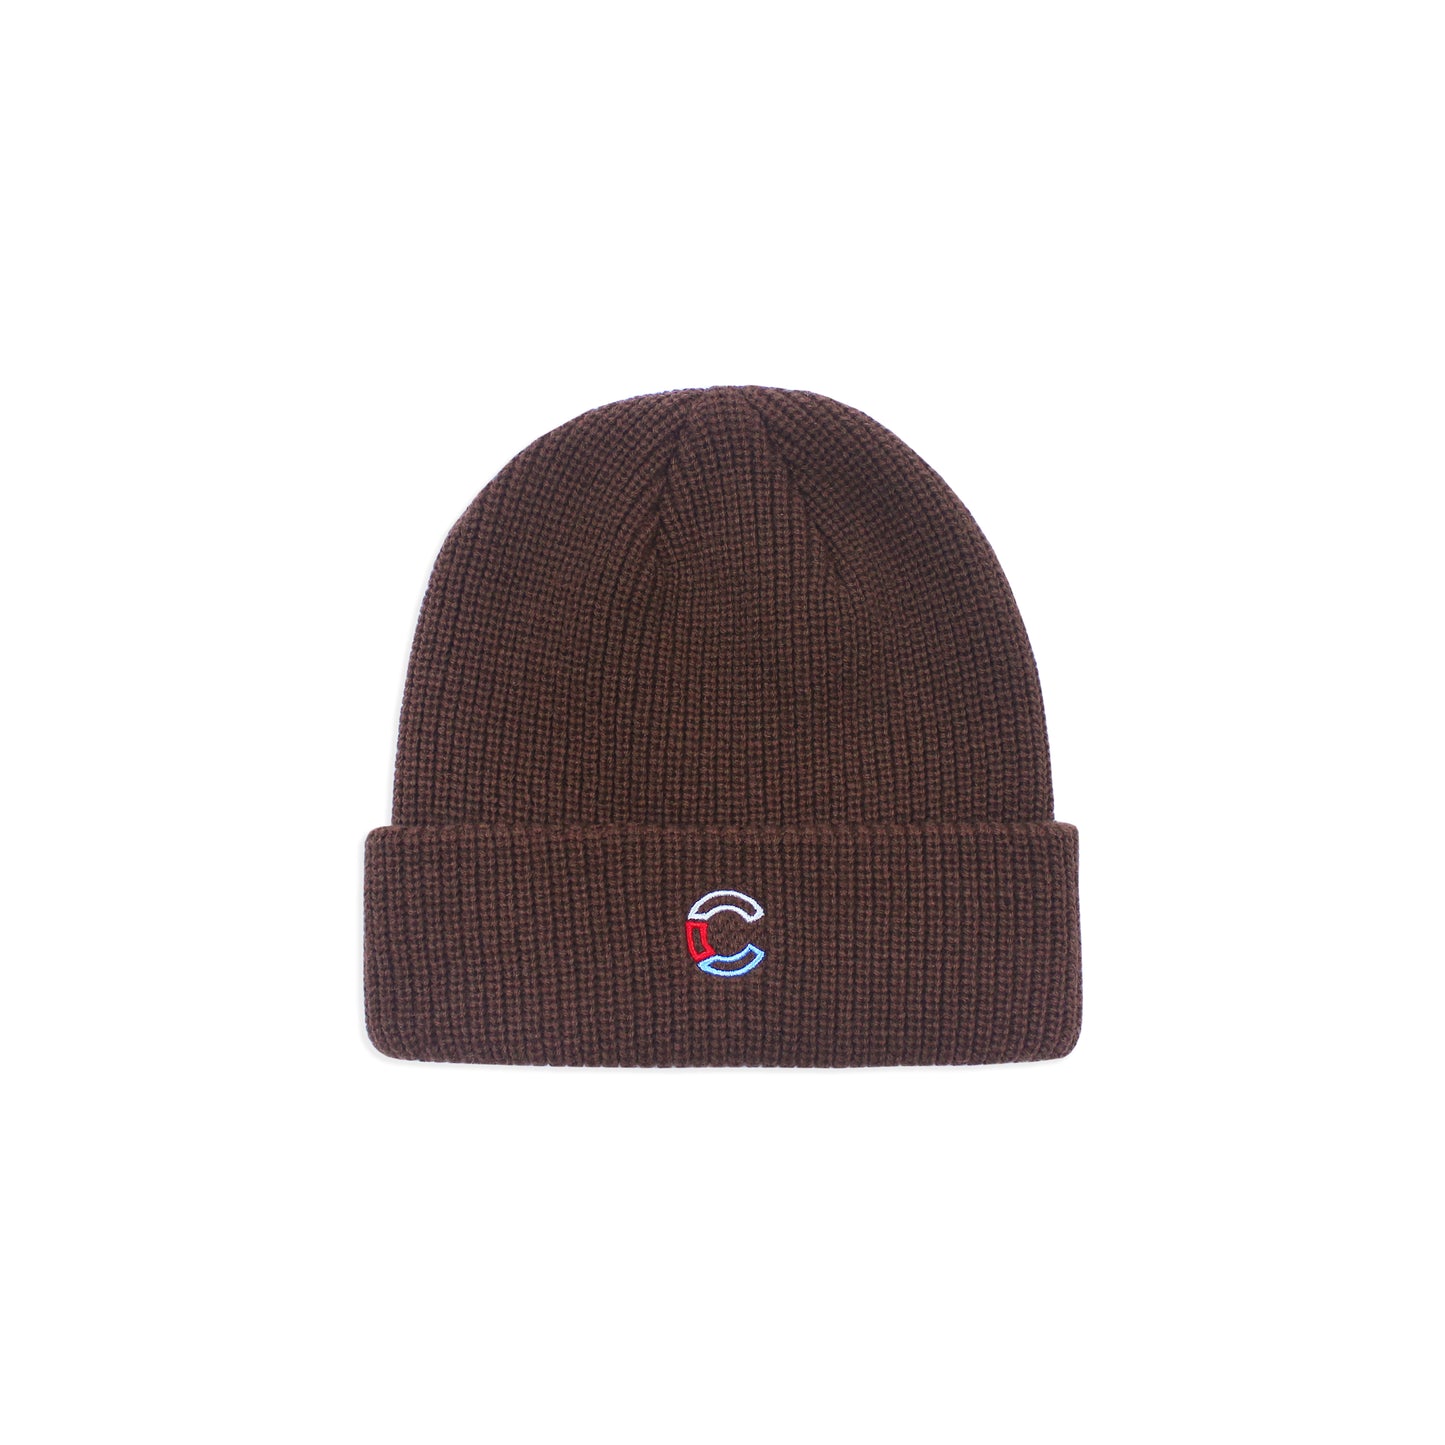 C Beanie Brown | Brown Beanie | the CRATE ny